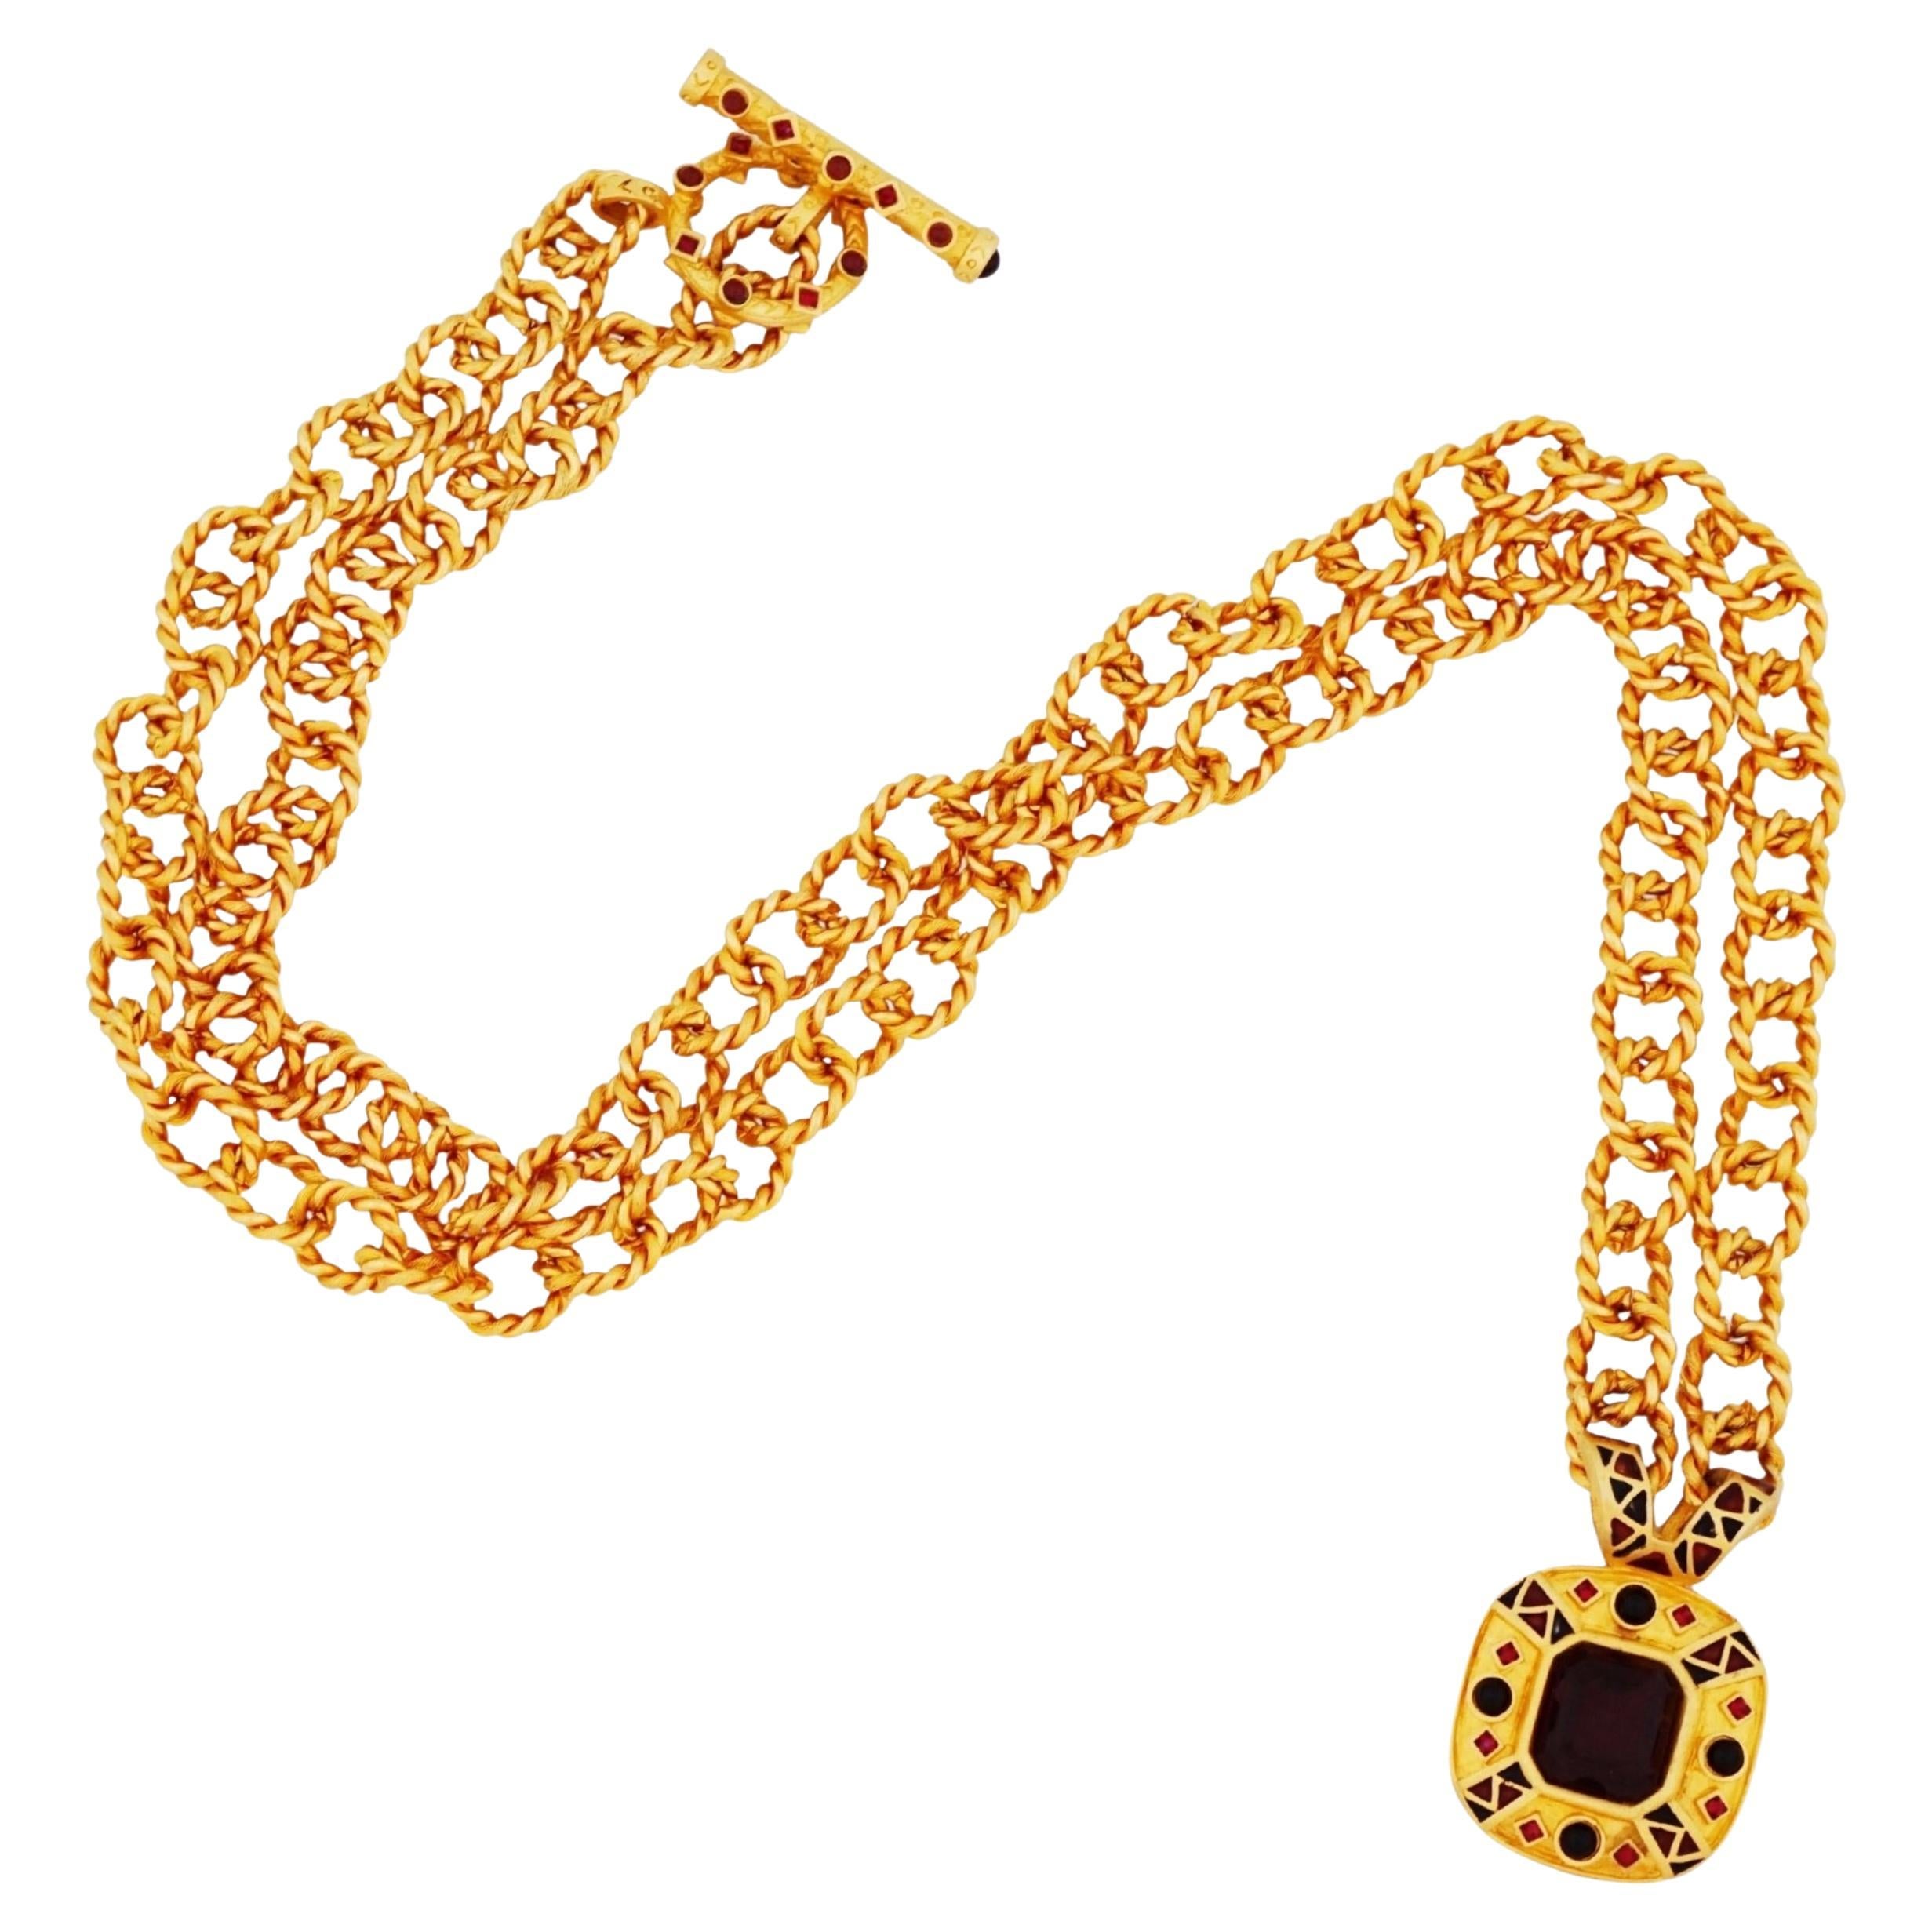 Chunky Satin Gilt Chain Necklace w/ Ruby Crystal Pendant By Leslie Block, 1980s